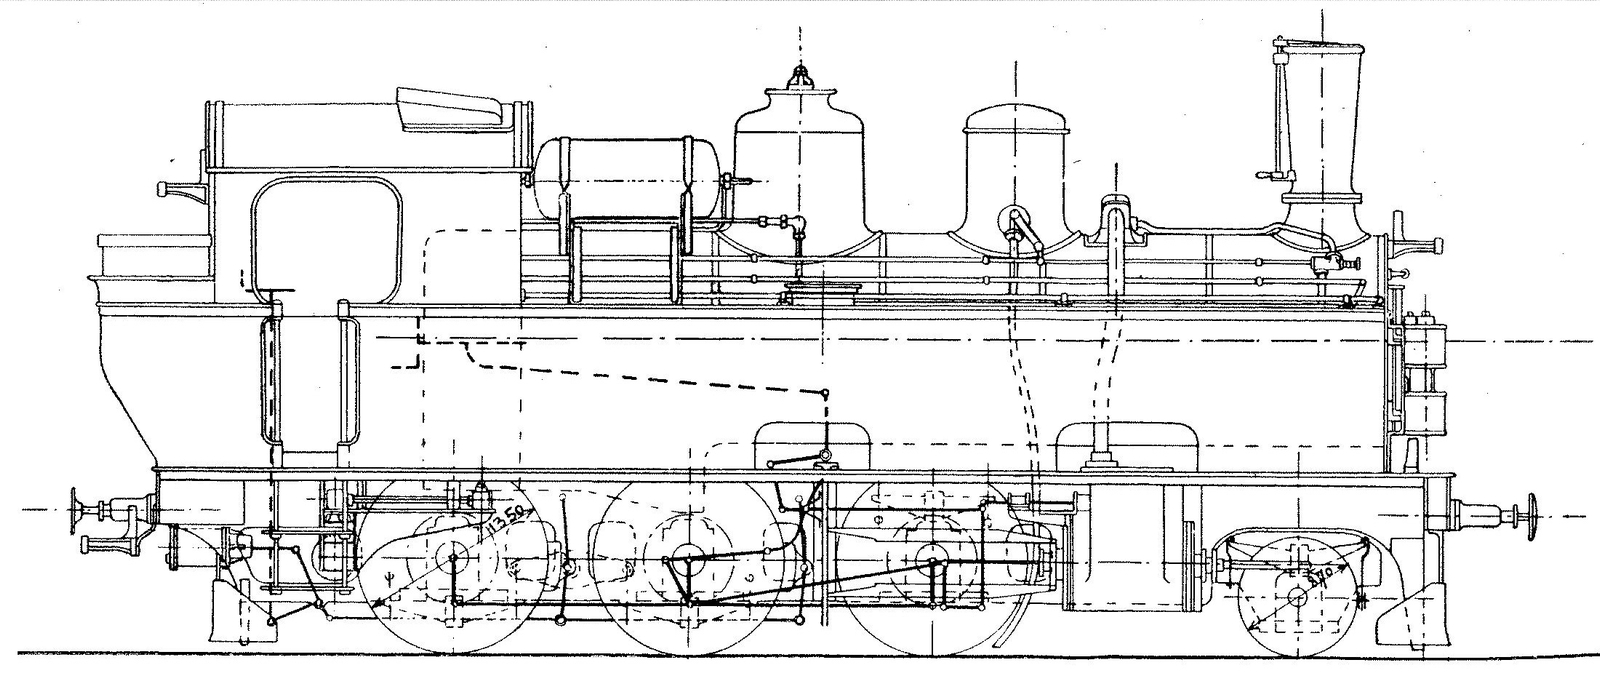 Schematic drawing of Nos. 89 to 92 from the SLM